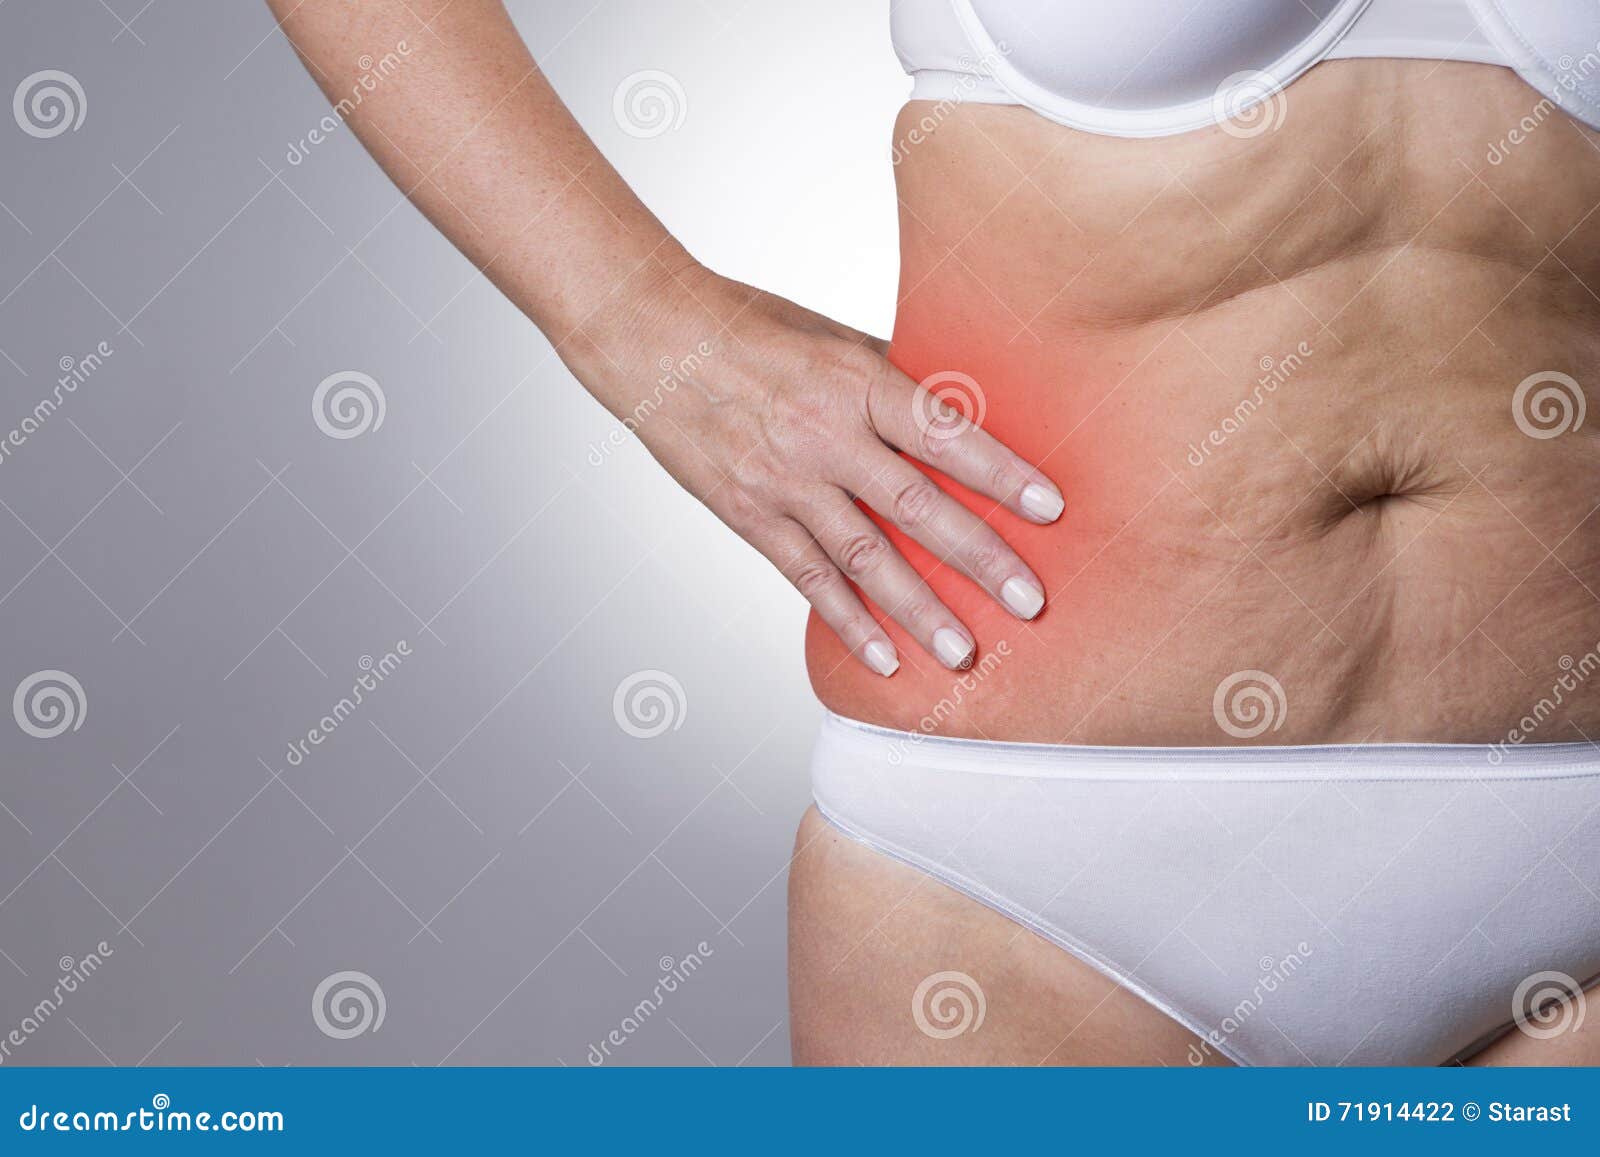 Woman With Pain In The Right Side Of The Body. Pain In The ...